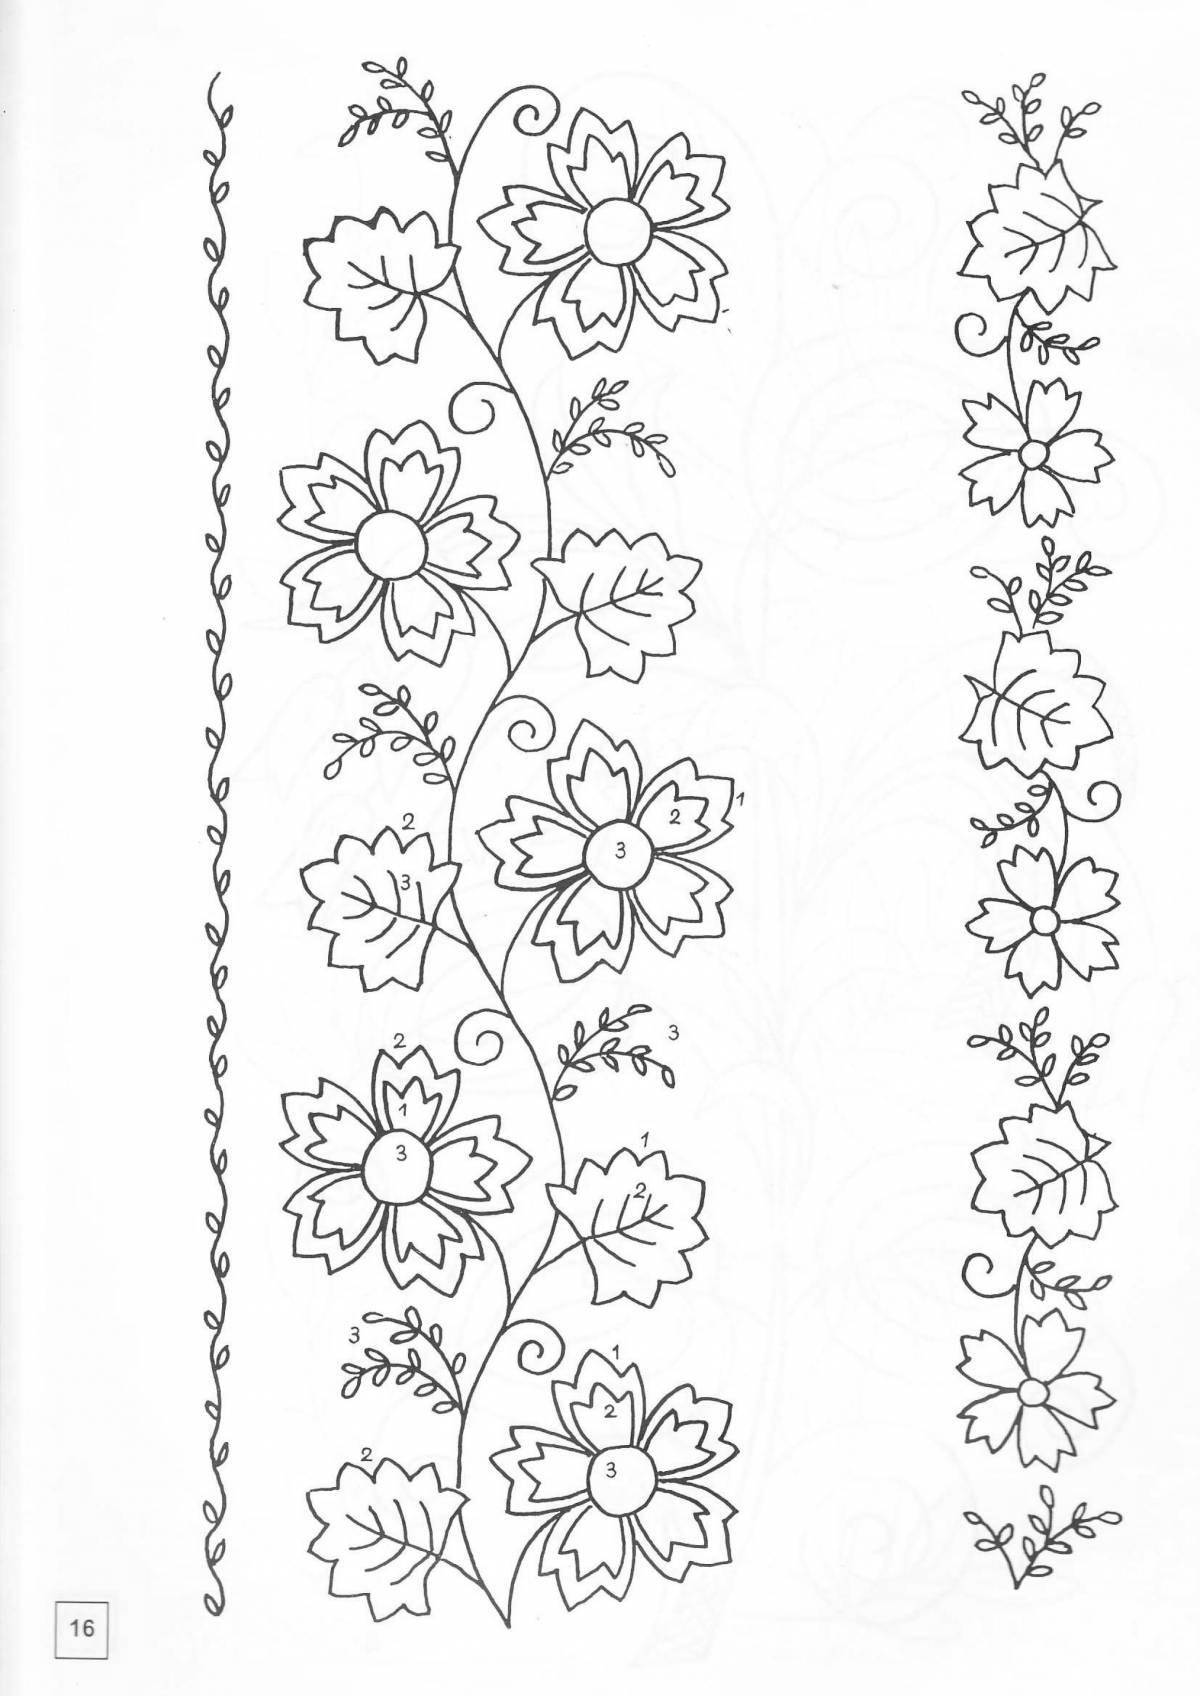 Coloring book with attractive floral patterns